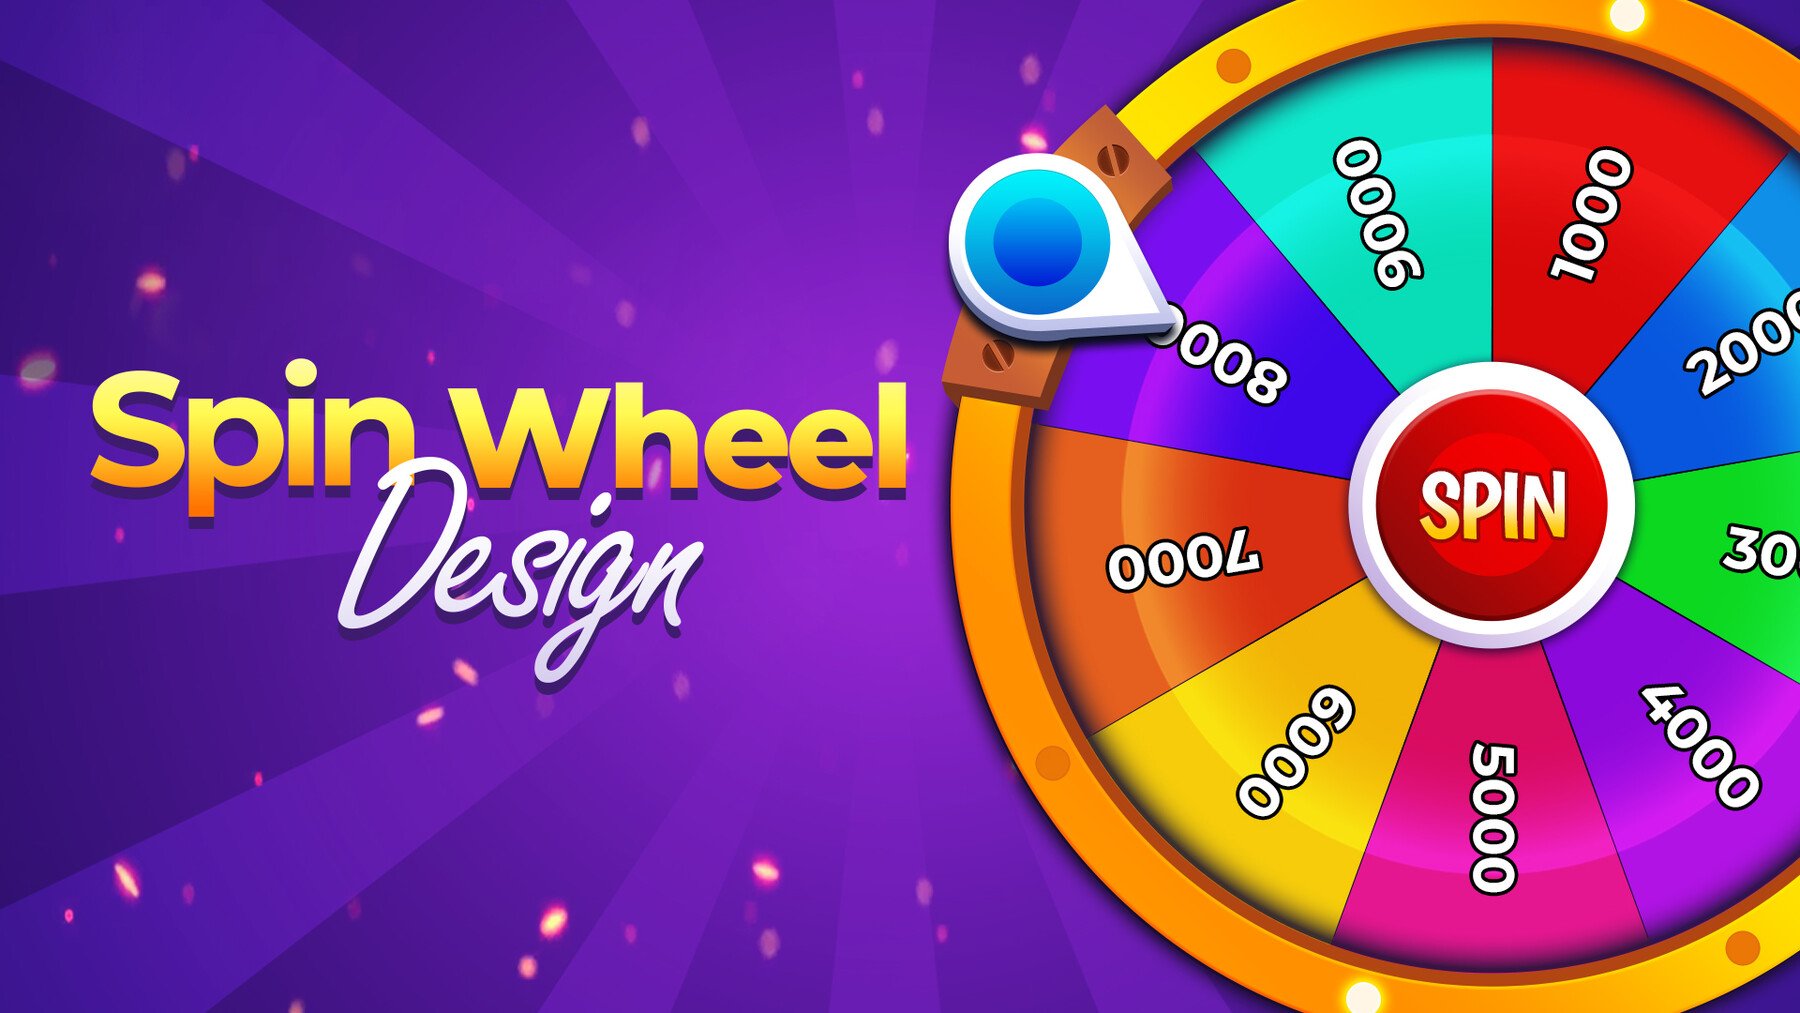 ArtStation - Spin Wheel with Slices - Spin and Win